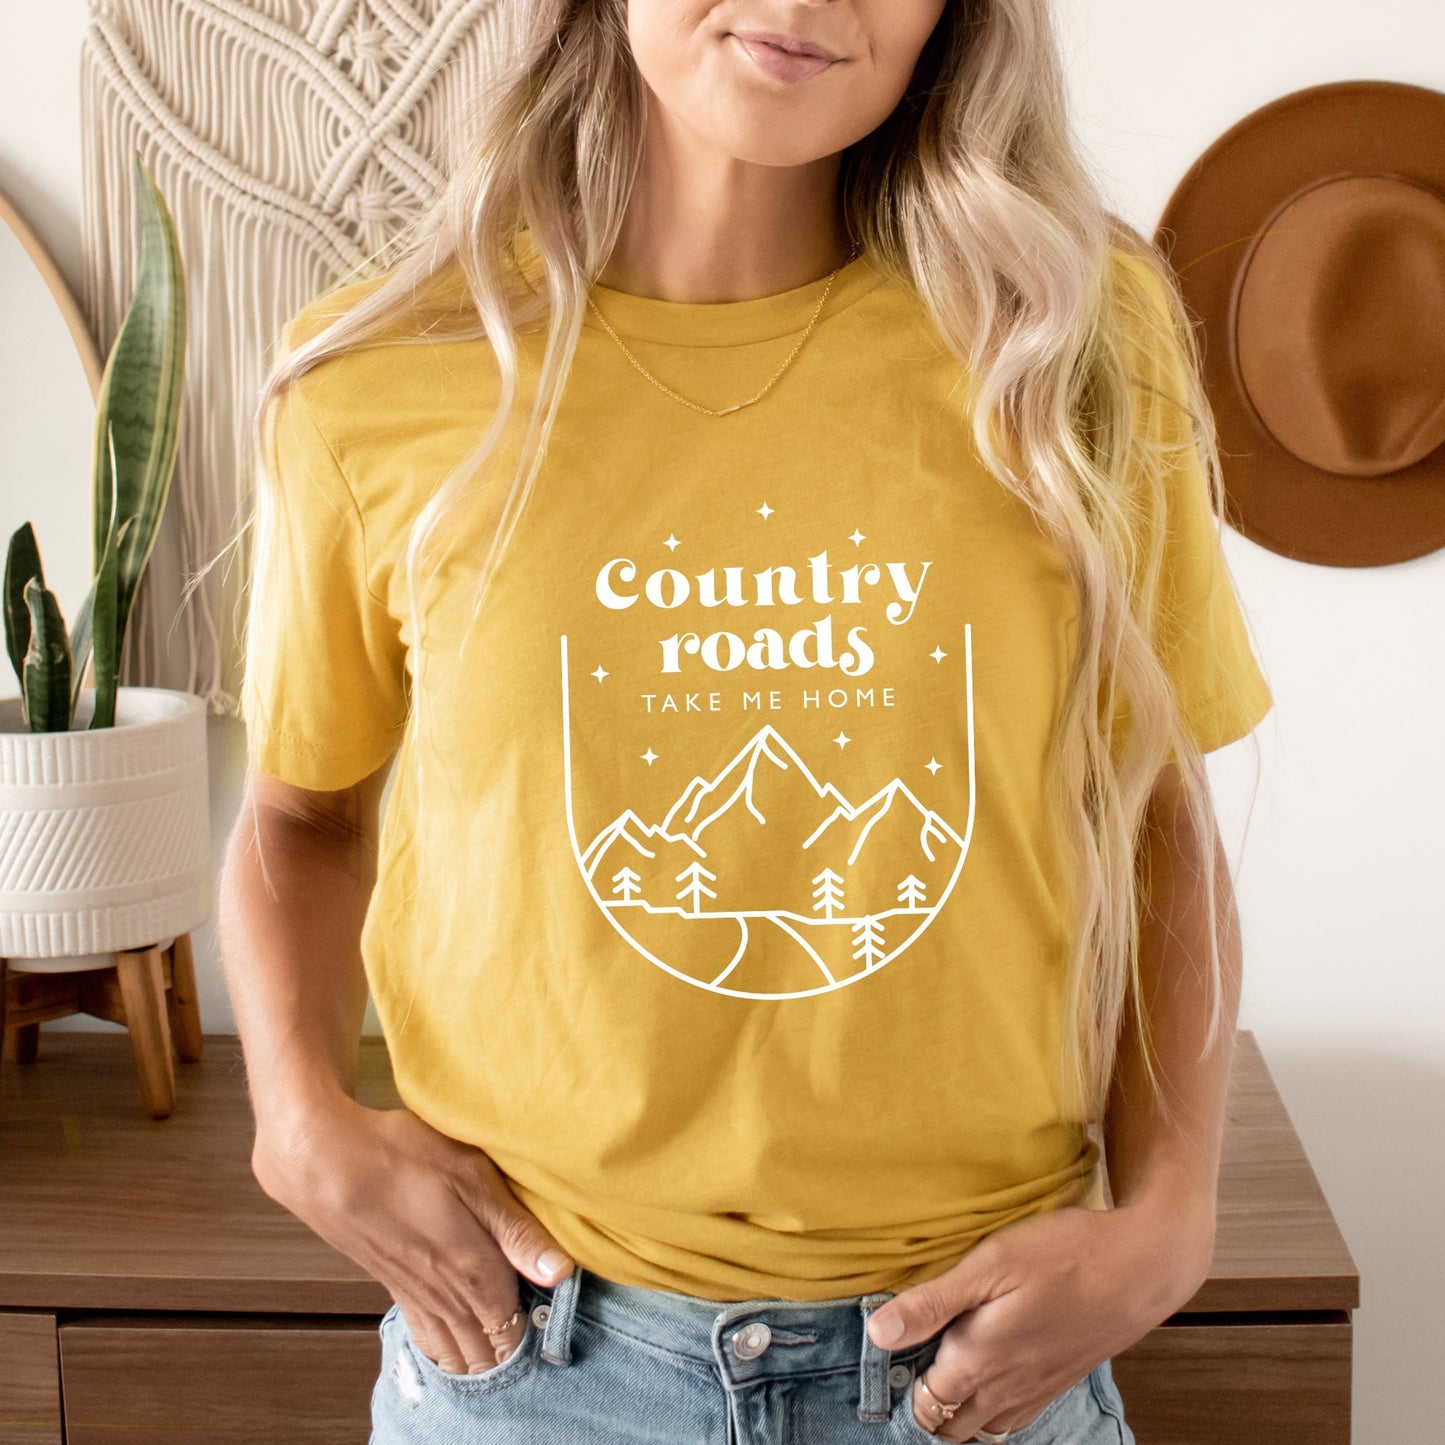 Country Roads Mountains | Short Sleeve Crew Neck